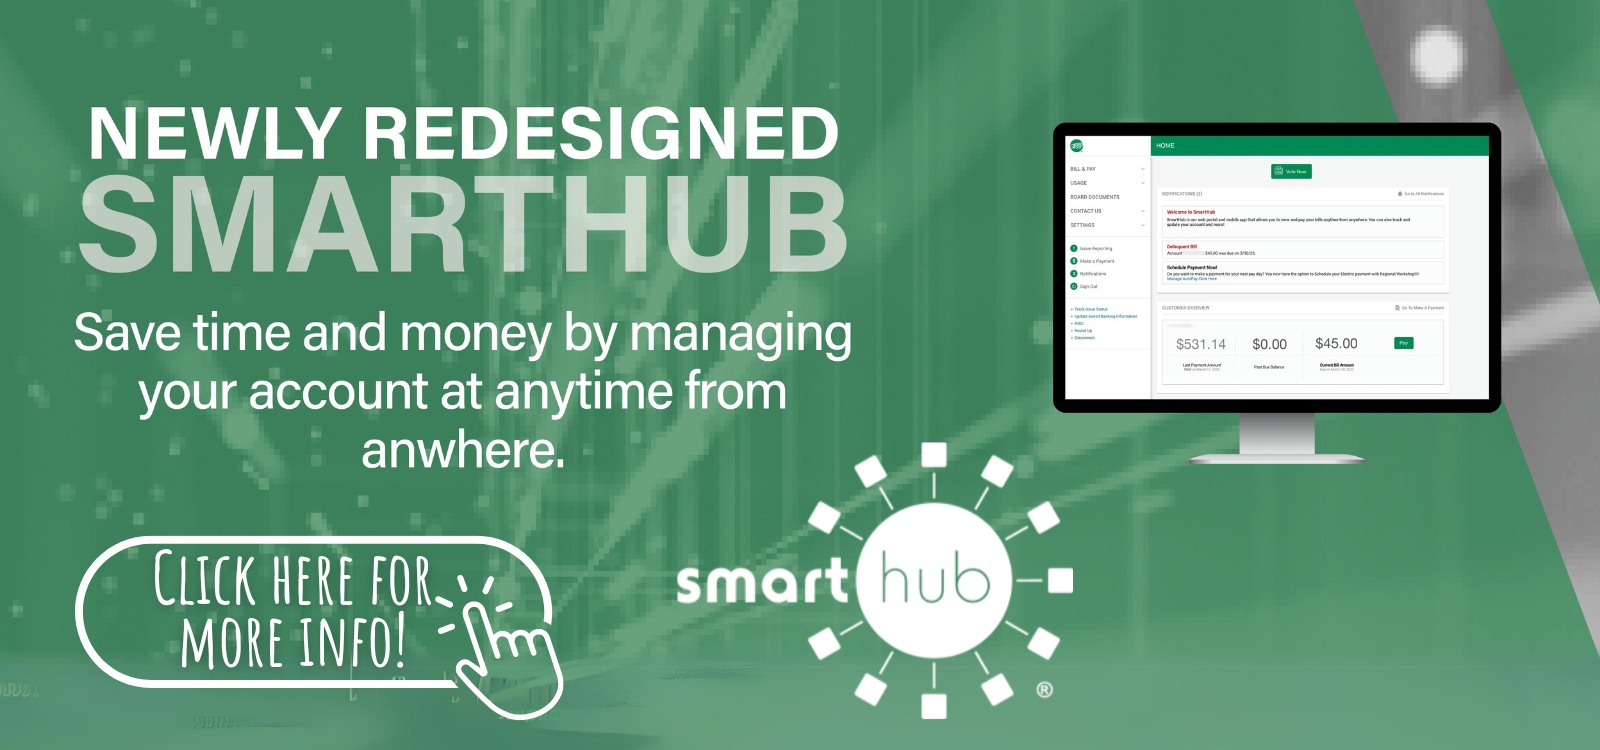 SmartHub is newly redesigned